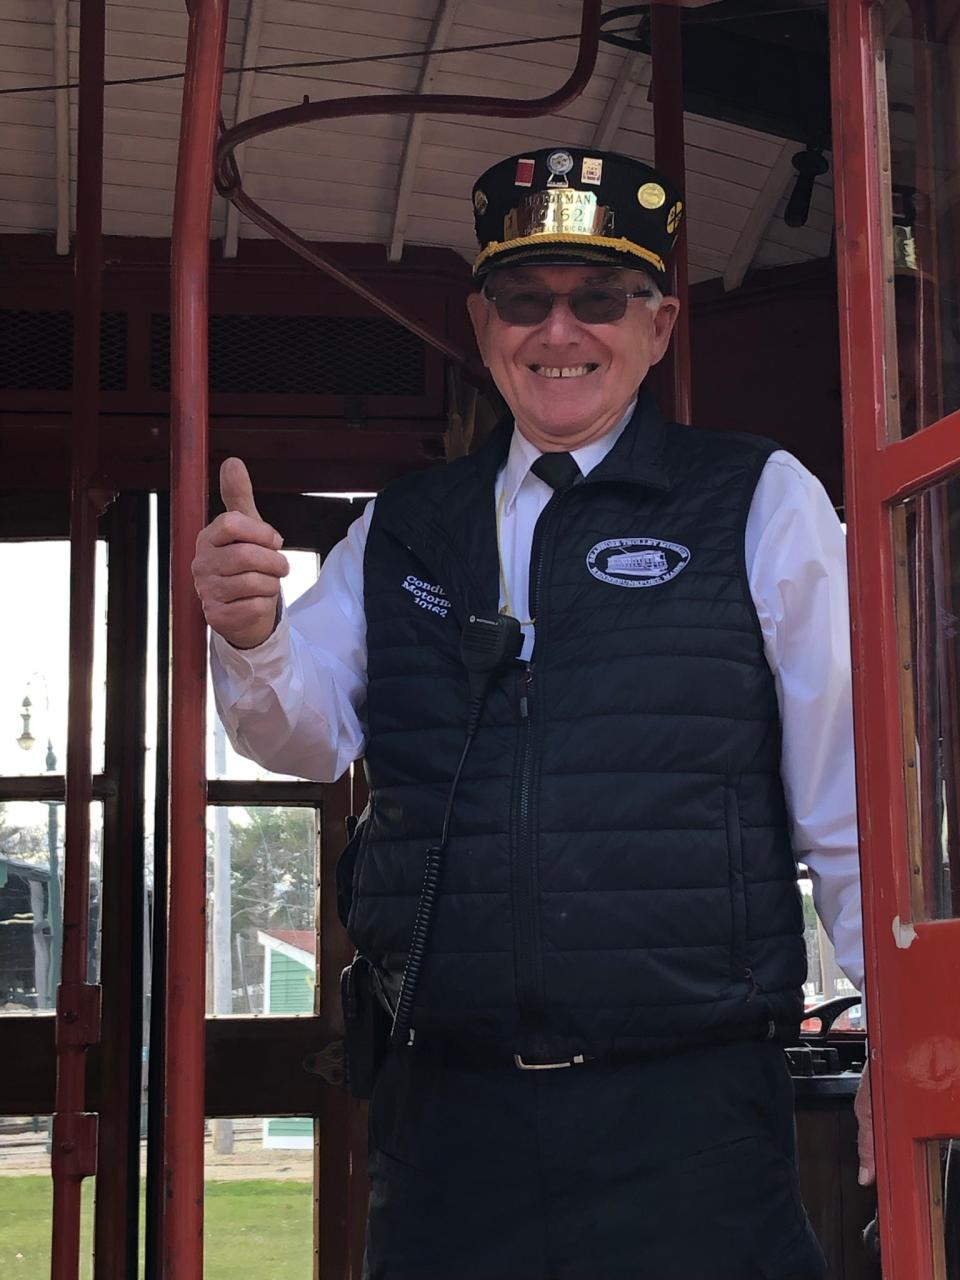 Rich Coots, of Wells, looks forward to welcoming back guests this season at Seashore Trolley Museum in Kennebunkport.